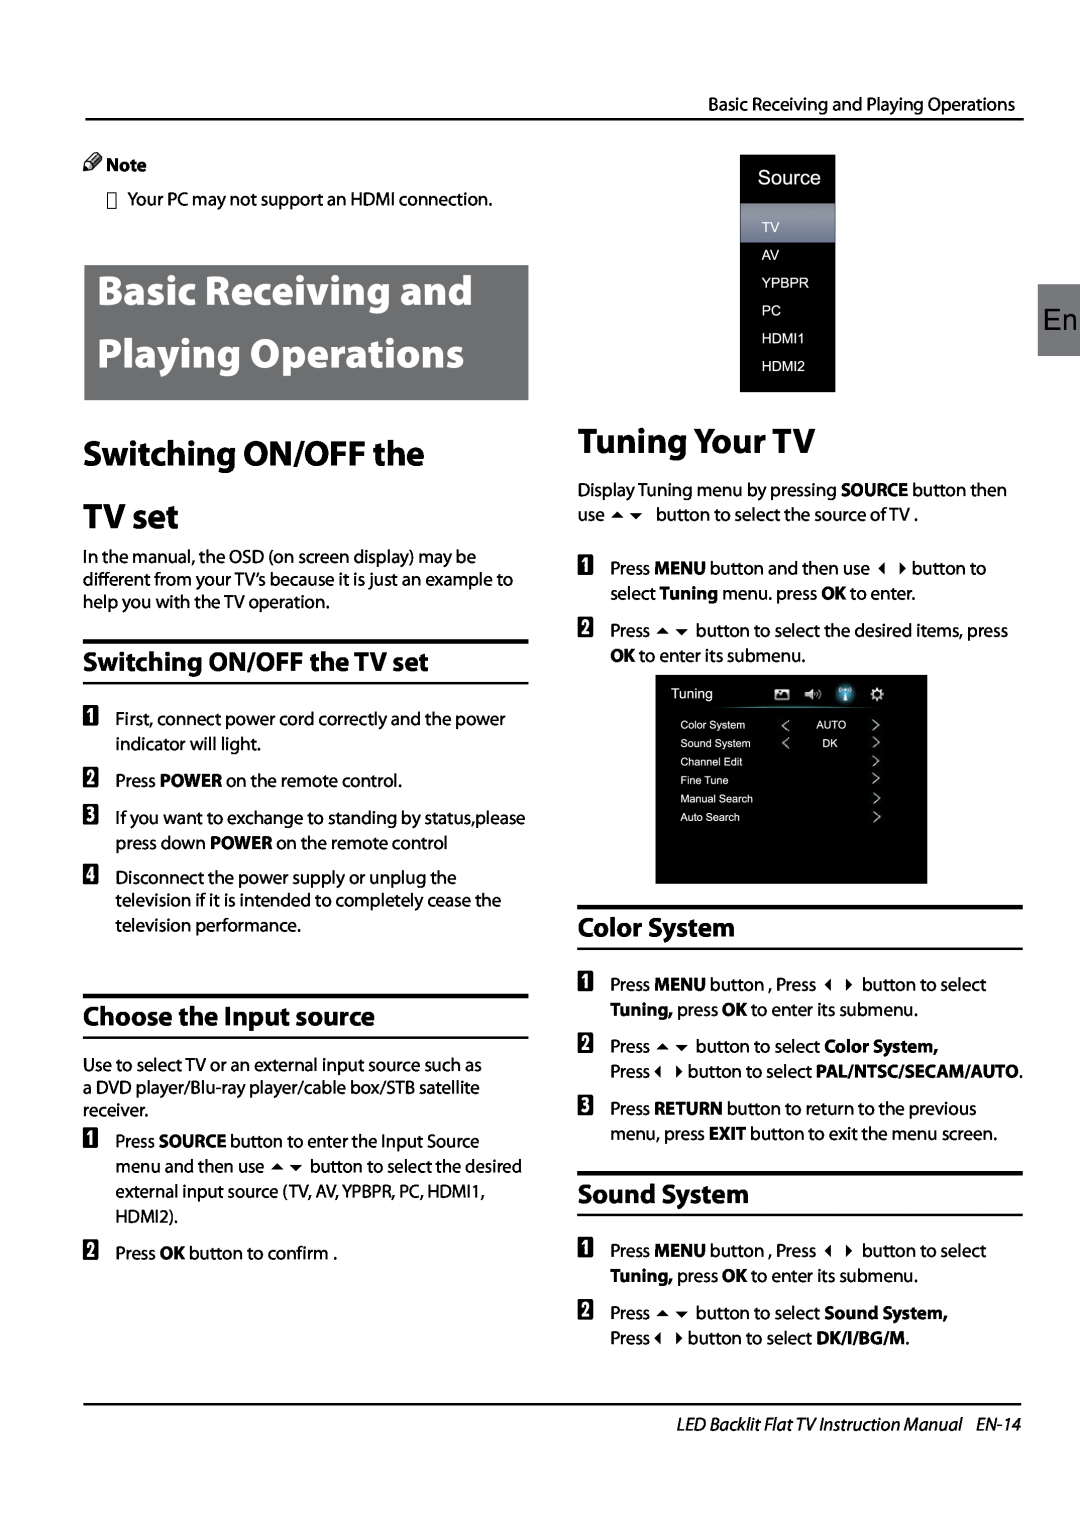 Haier LE47H5000 manual Switching ON/OFF the TV set, Tuning Your TV, Choose the Input source, Color System, Sound System 